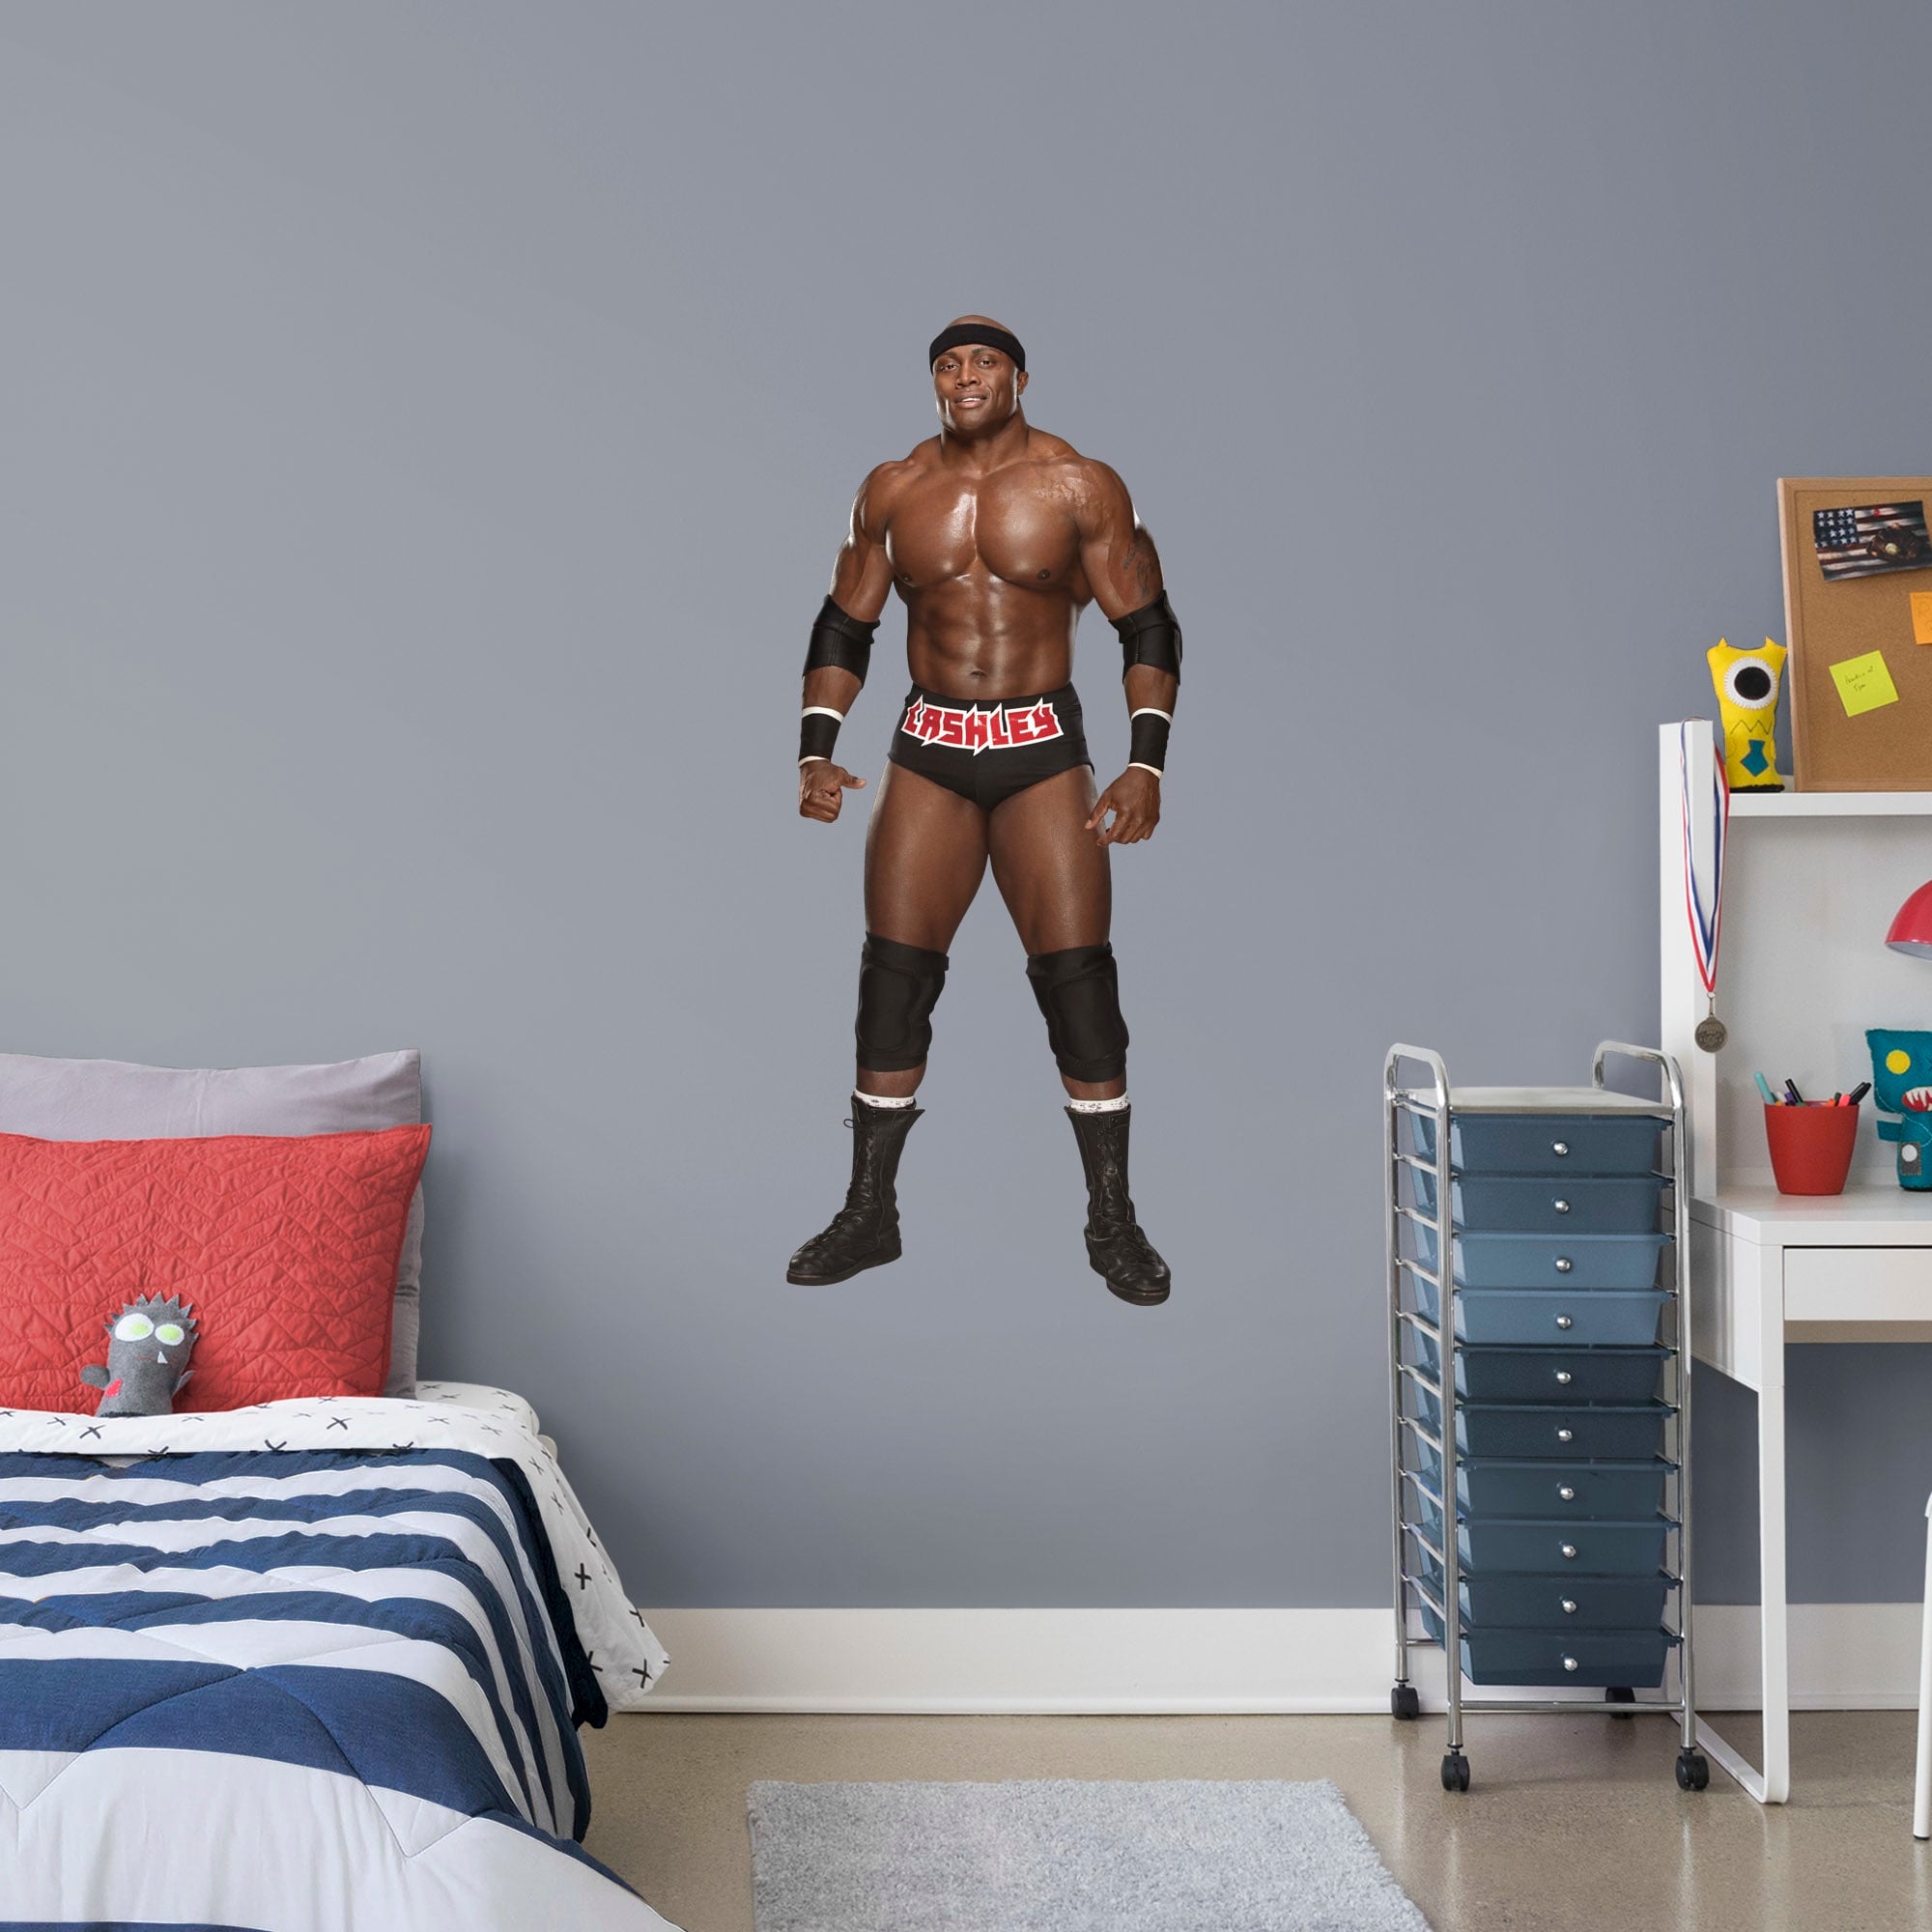 Bobby Lashley for WWE - Officially Licensed Removable Wall Decal Giant Superstar + 2 Decals (20"W x 51"H) by Fathead | Vinyl